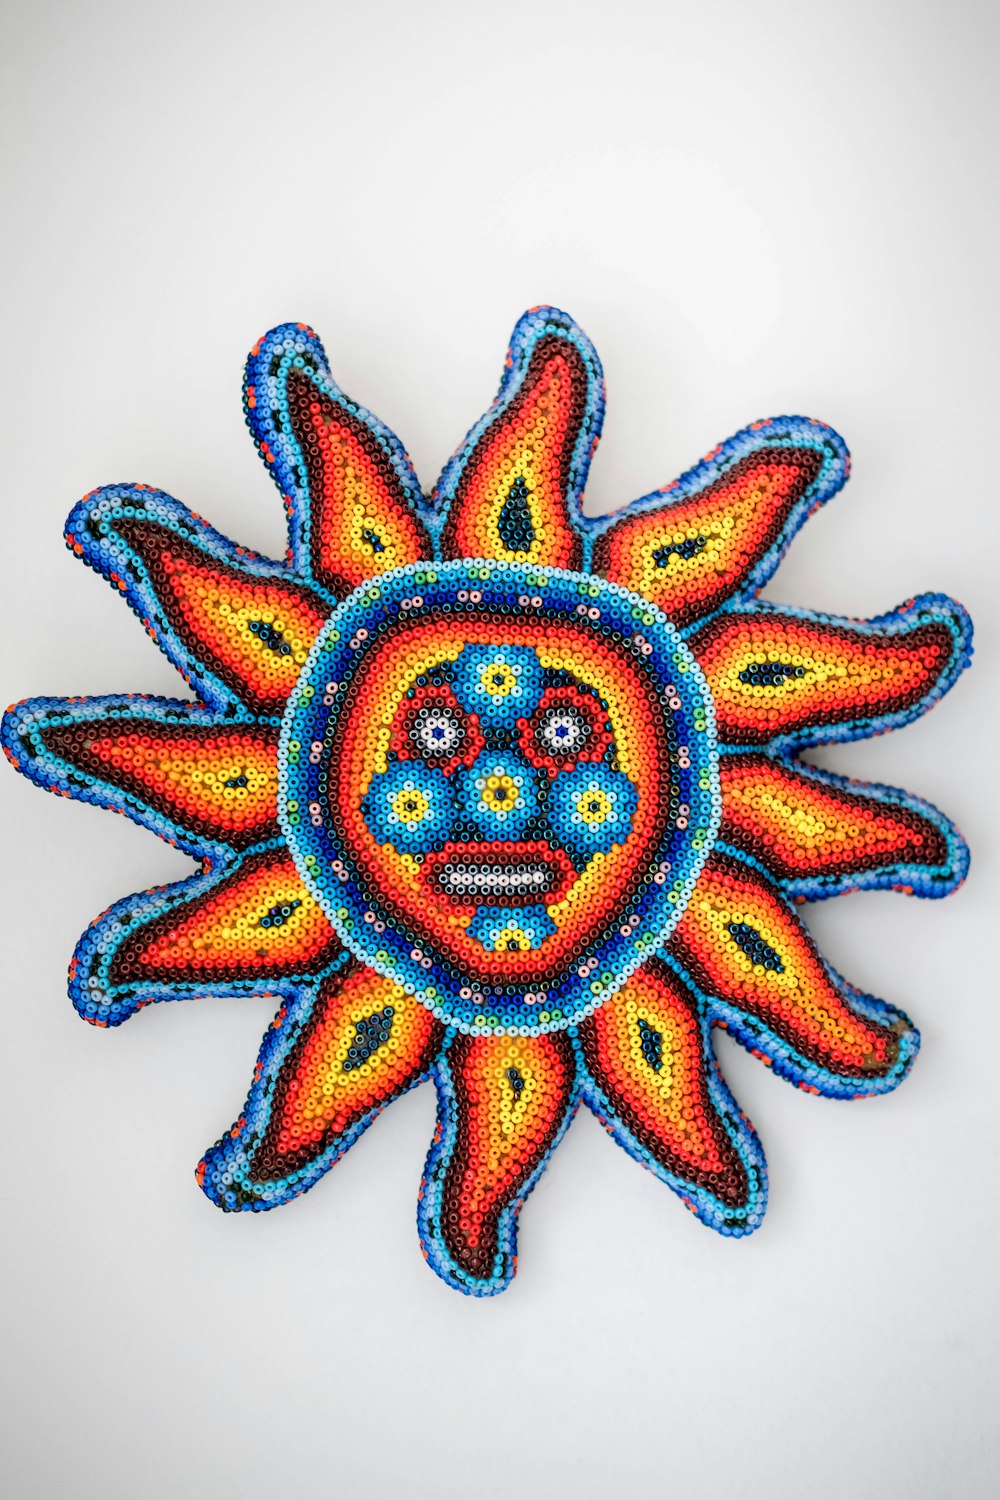 a colorful sun with a face made of beads